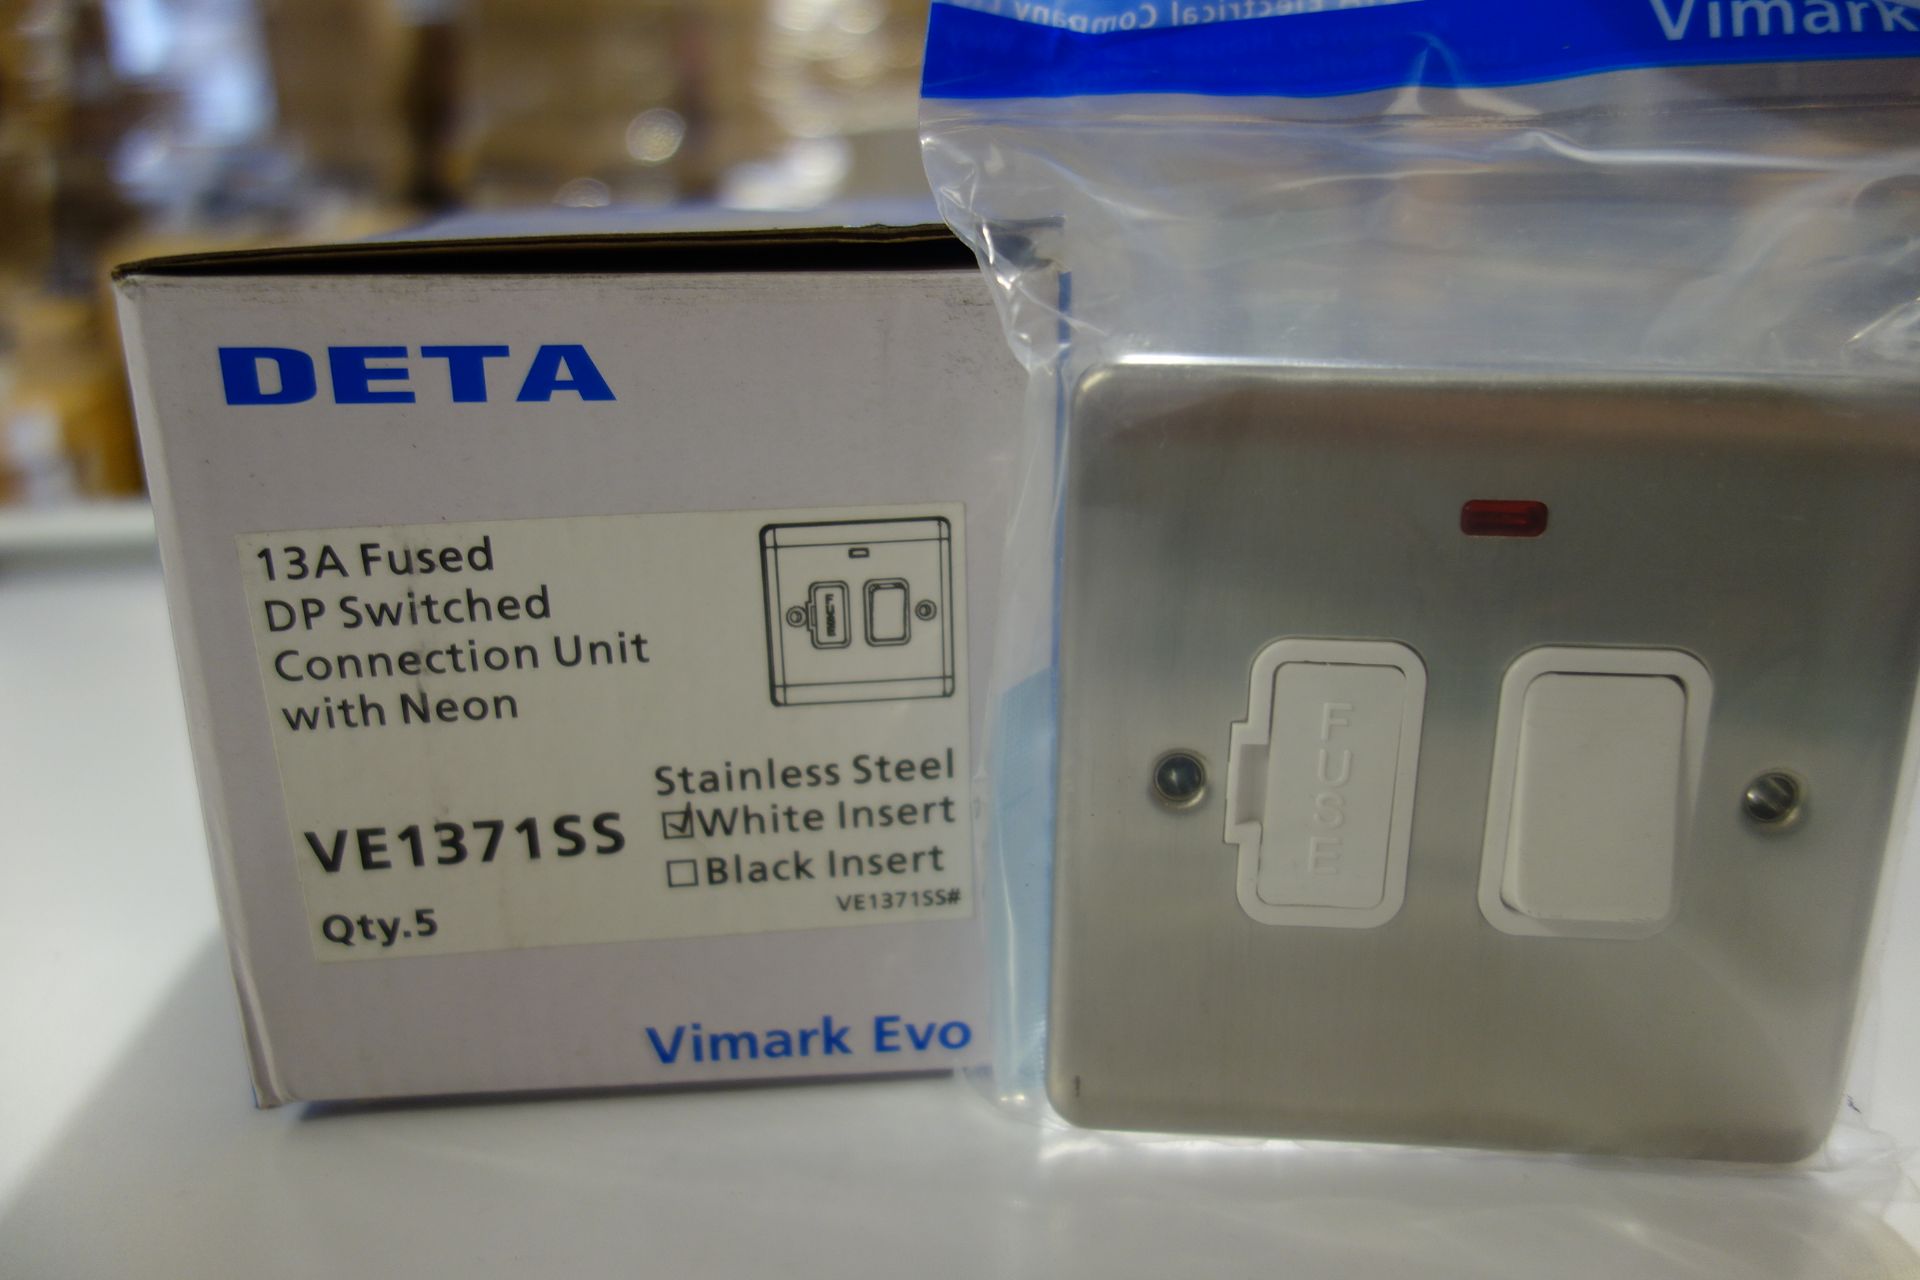 50 X Deta VE1371SSW 13A Fused DP Switched Connection Unit With Neon Stainless Steel White Inserts